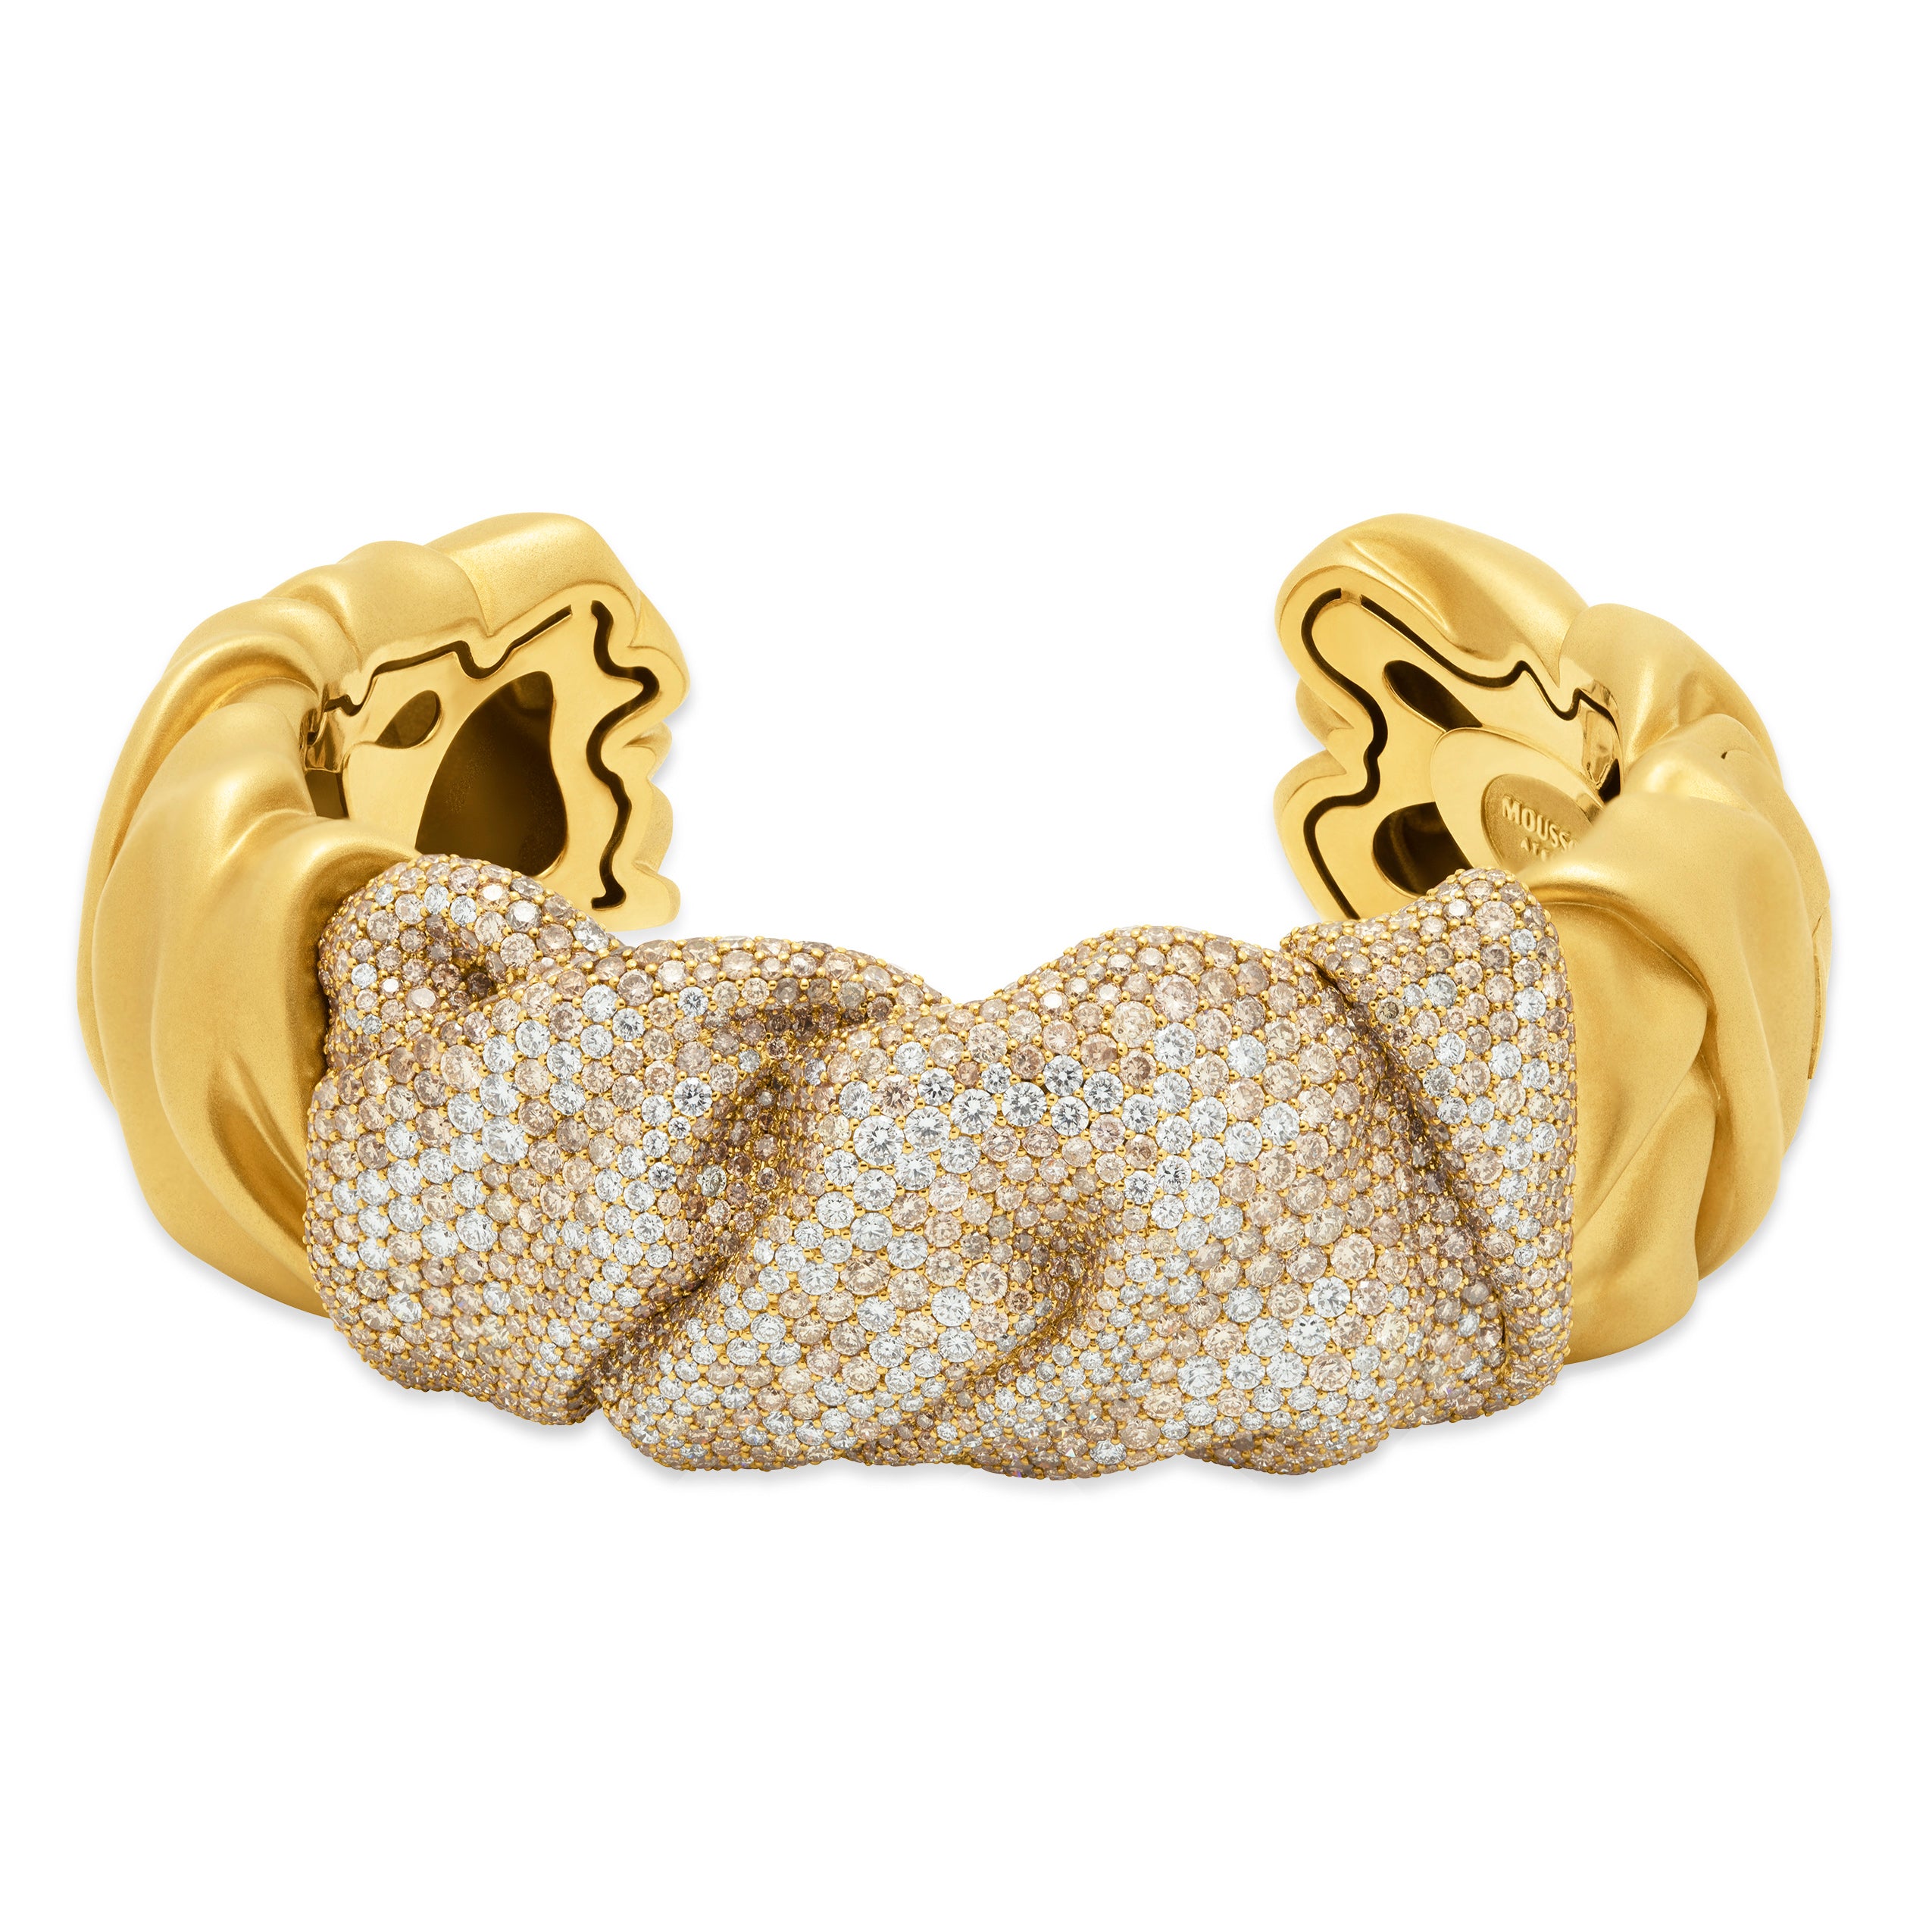 Br 0132-0, 18K Yellow Gold, White and Champagne Diamonds Bracelet